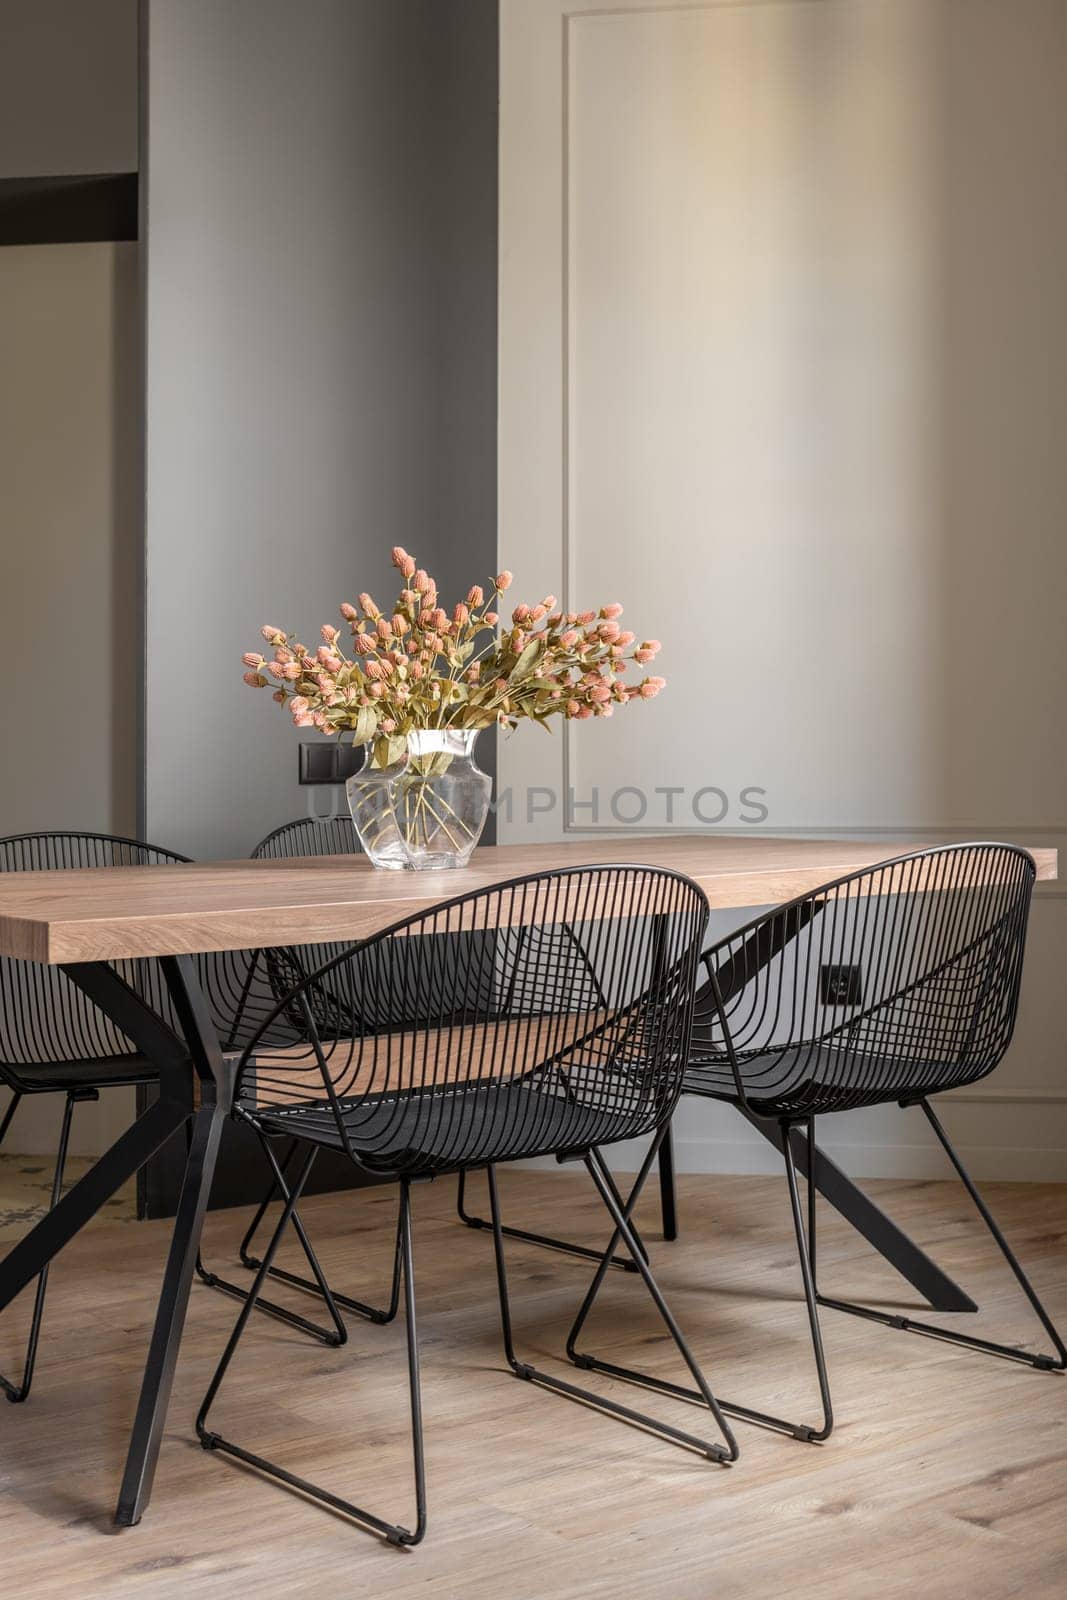 Modern indoor furniture with wood table, flower vase, and plant accents in a stylish apartment living room by apavlin